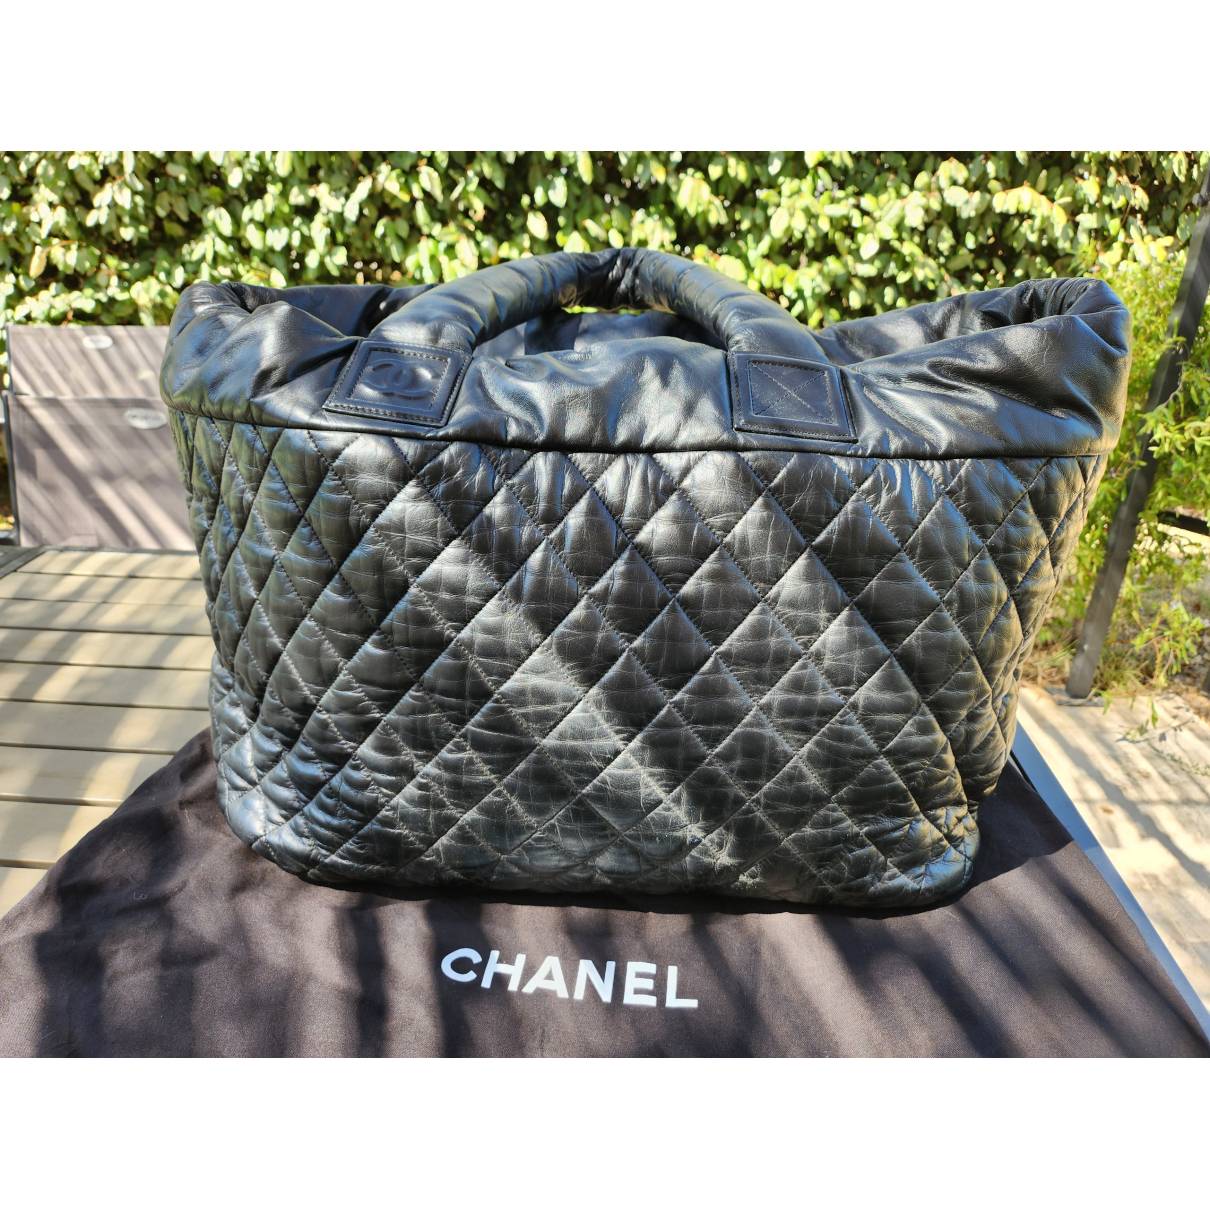 Chanel - Authenticated Coco Cocoon Handbag - Leather Black Plain for Women, Very Good Condition